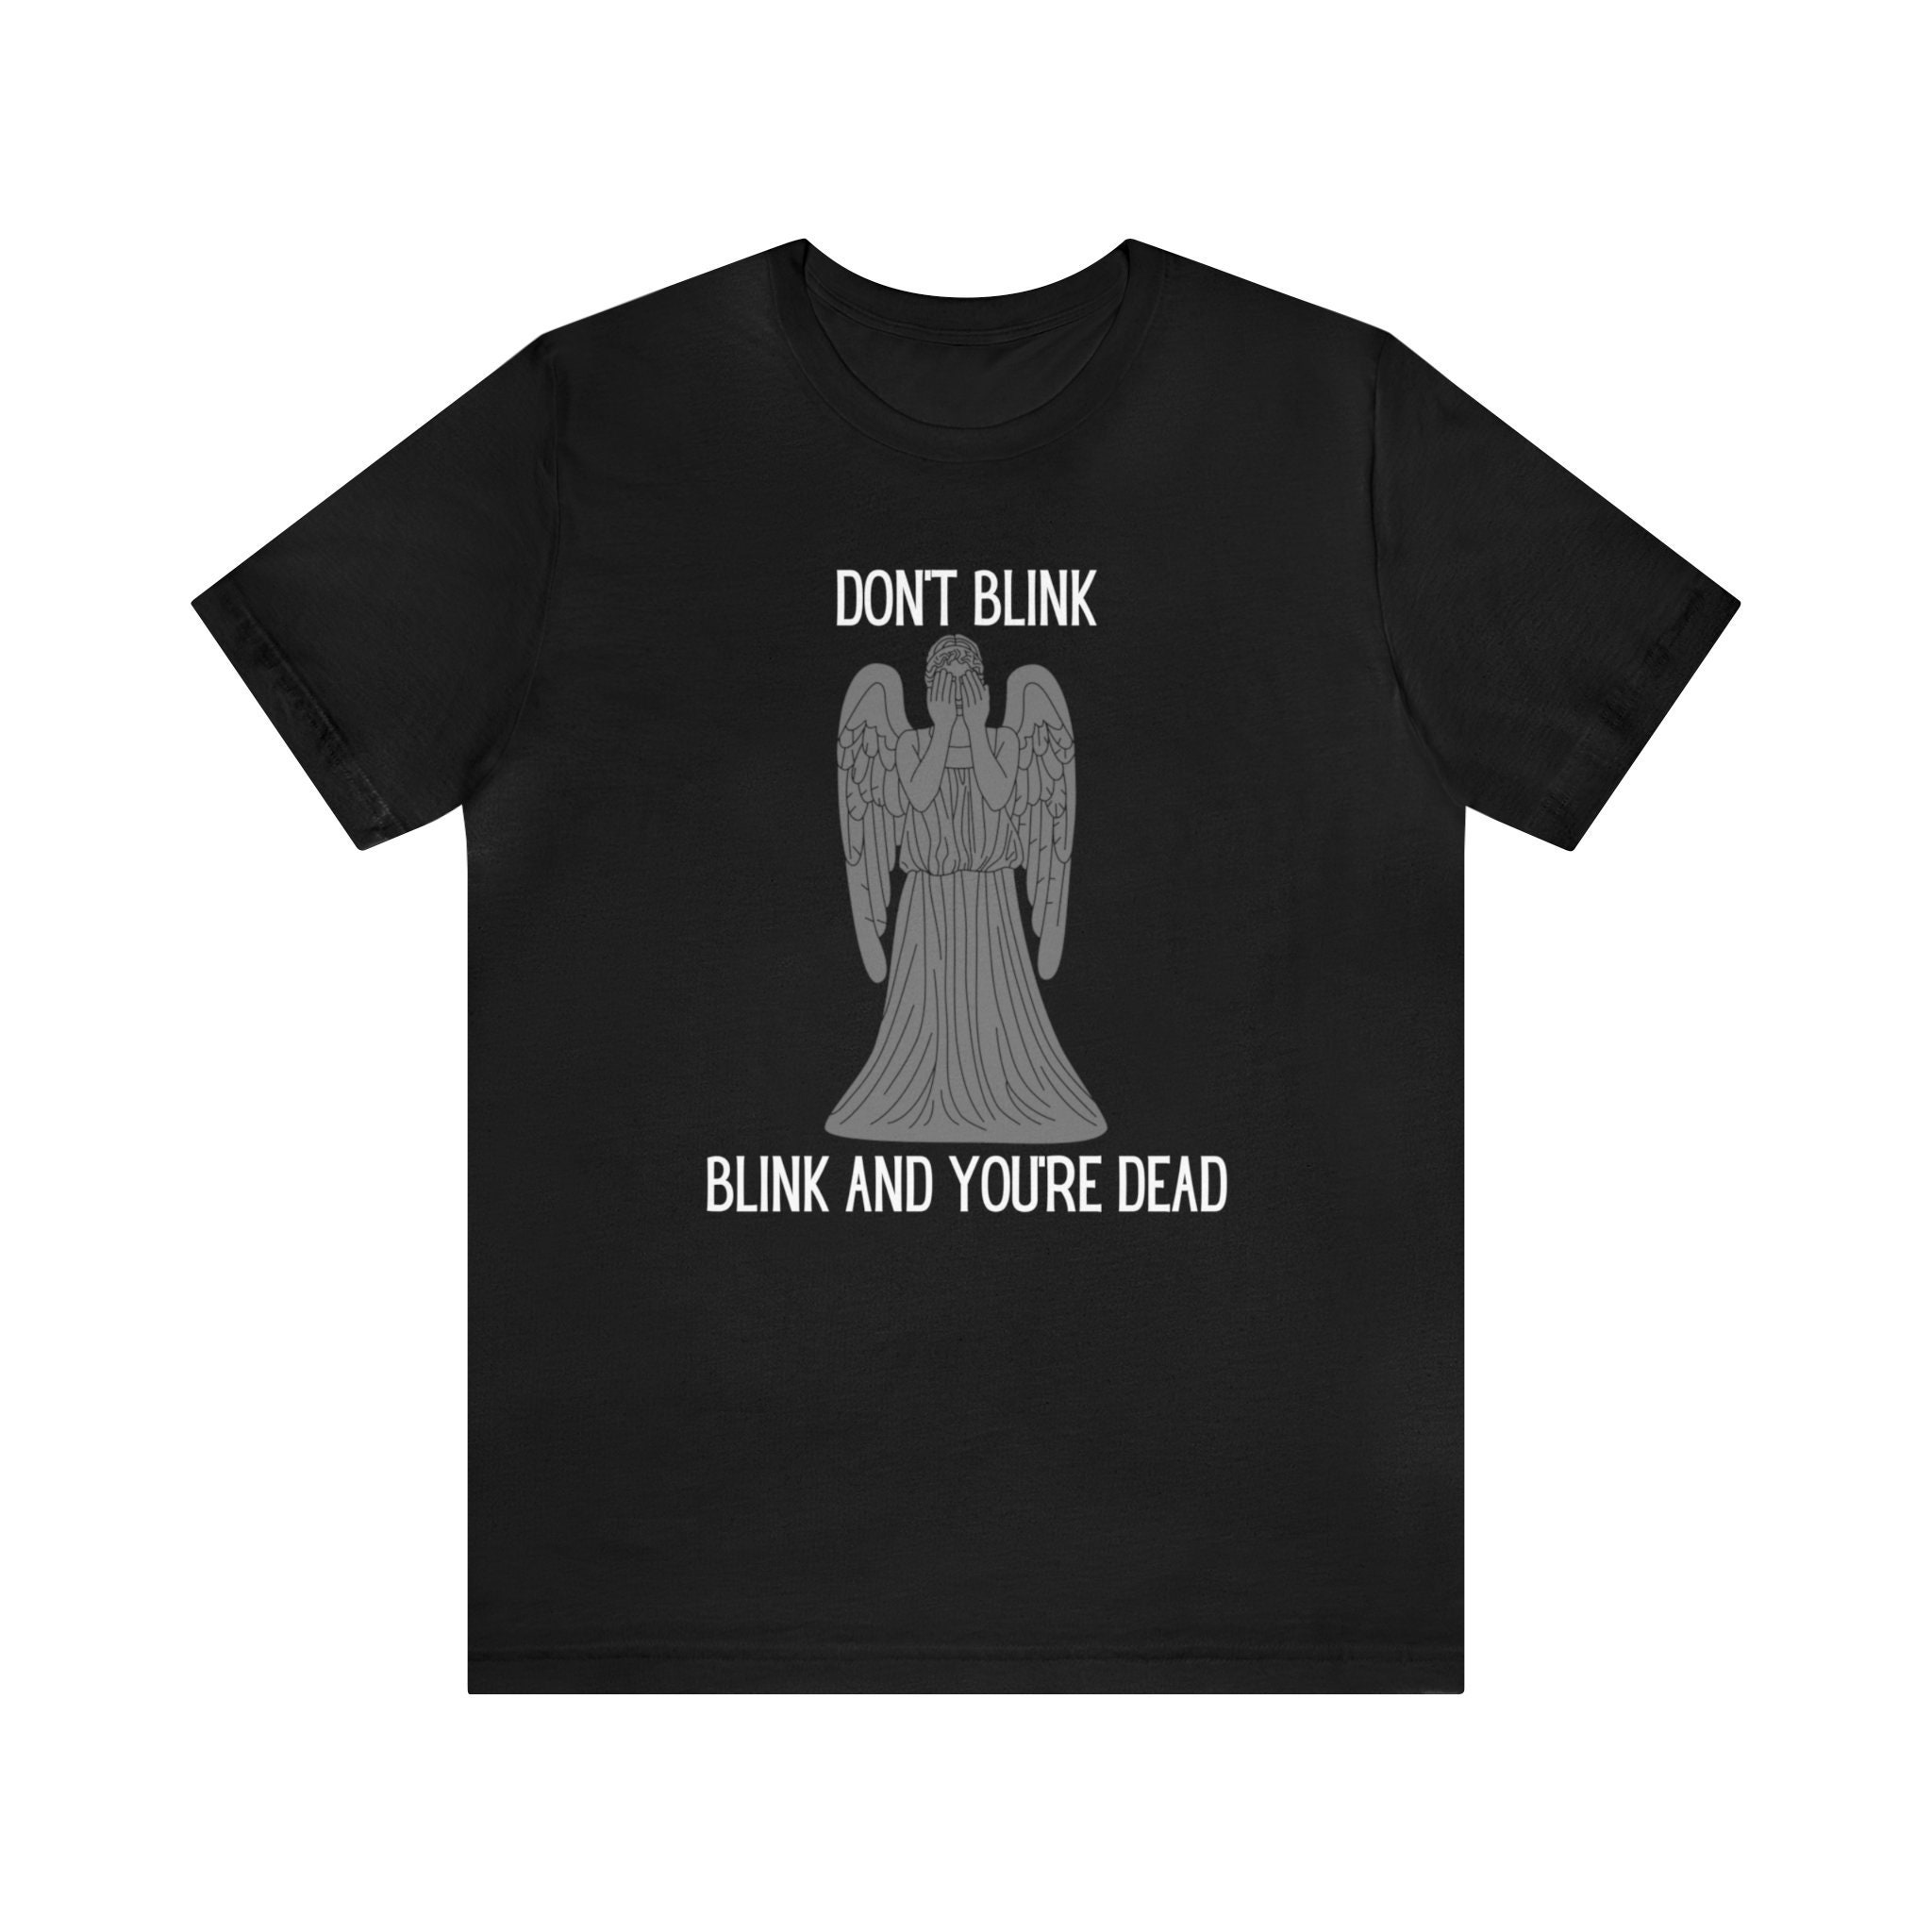 Doctor Who, Doctor Who Shirt, Weeping Angel, Don't Blink, Blink